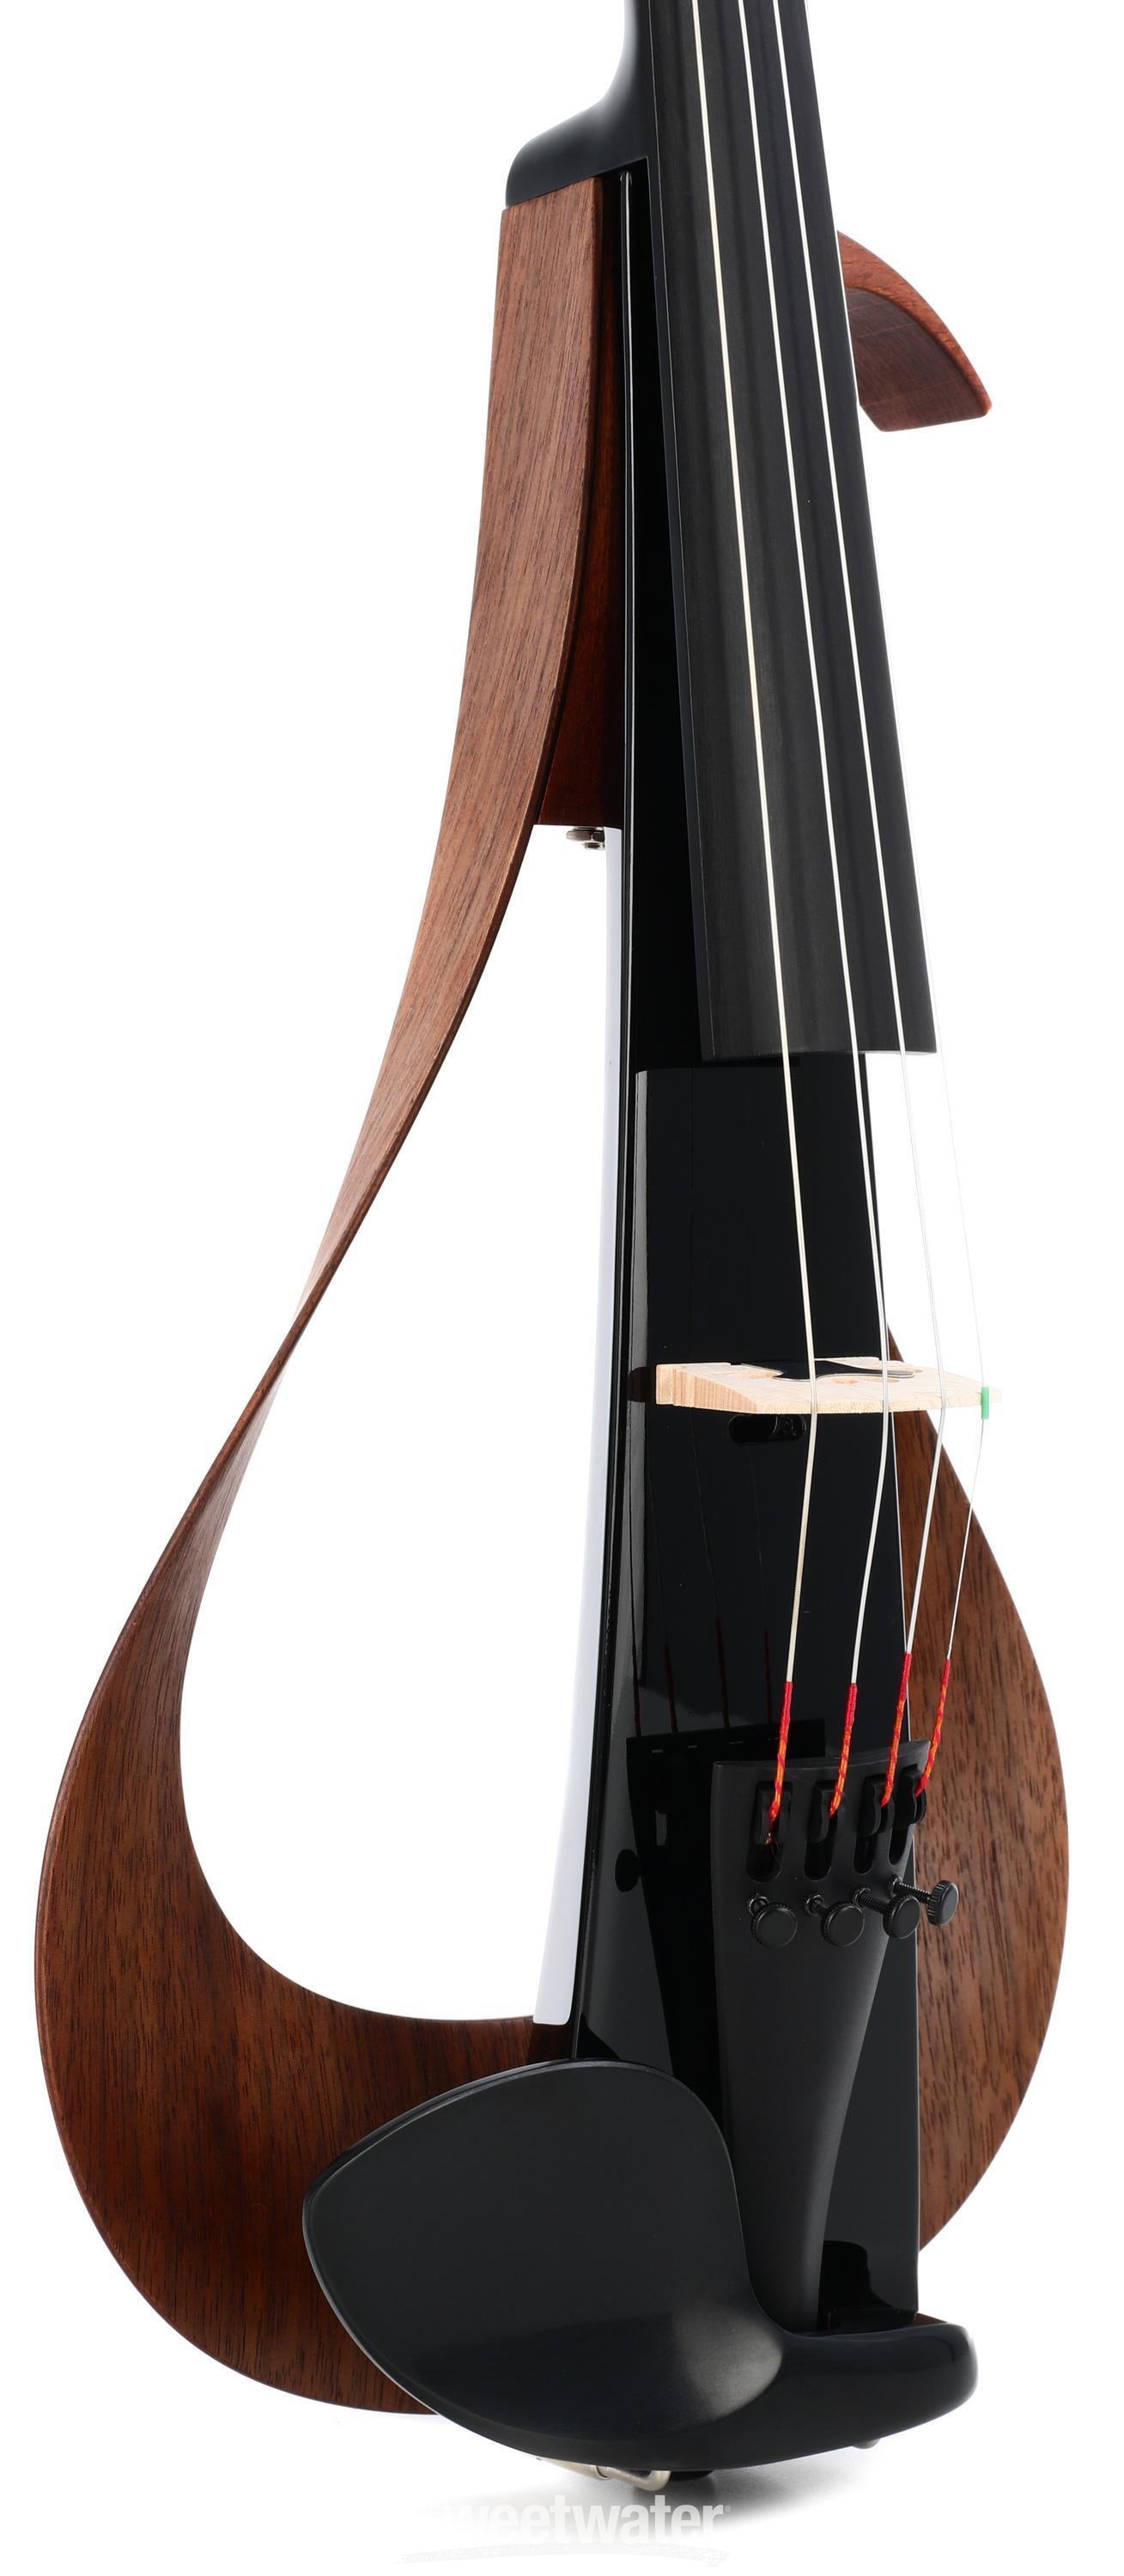 Yamaha YEV104 Electric Violin - Black Lacquer | Sweetwater